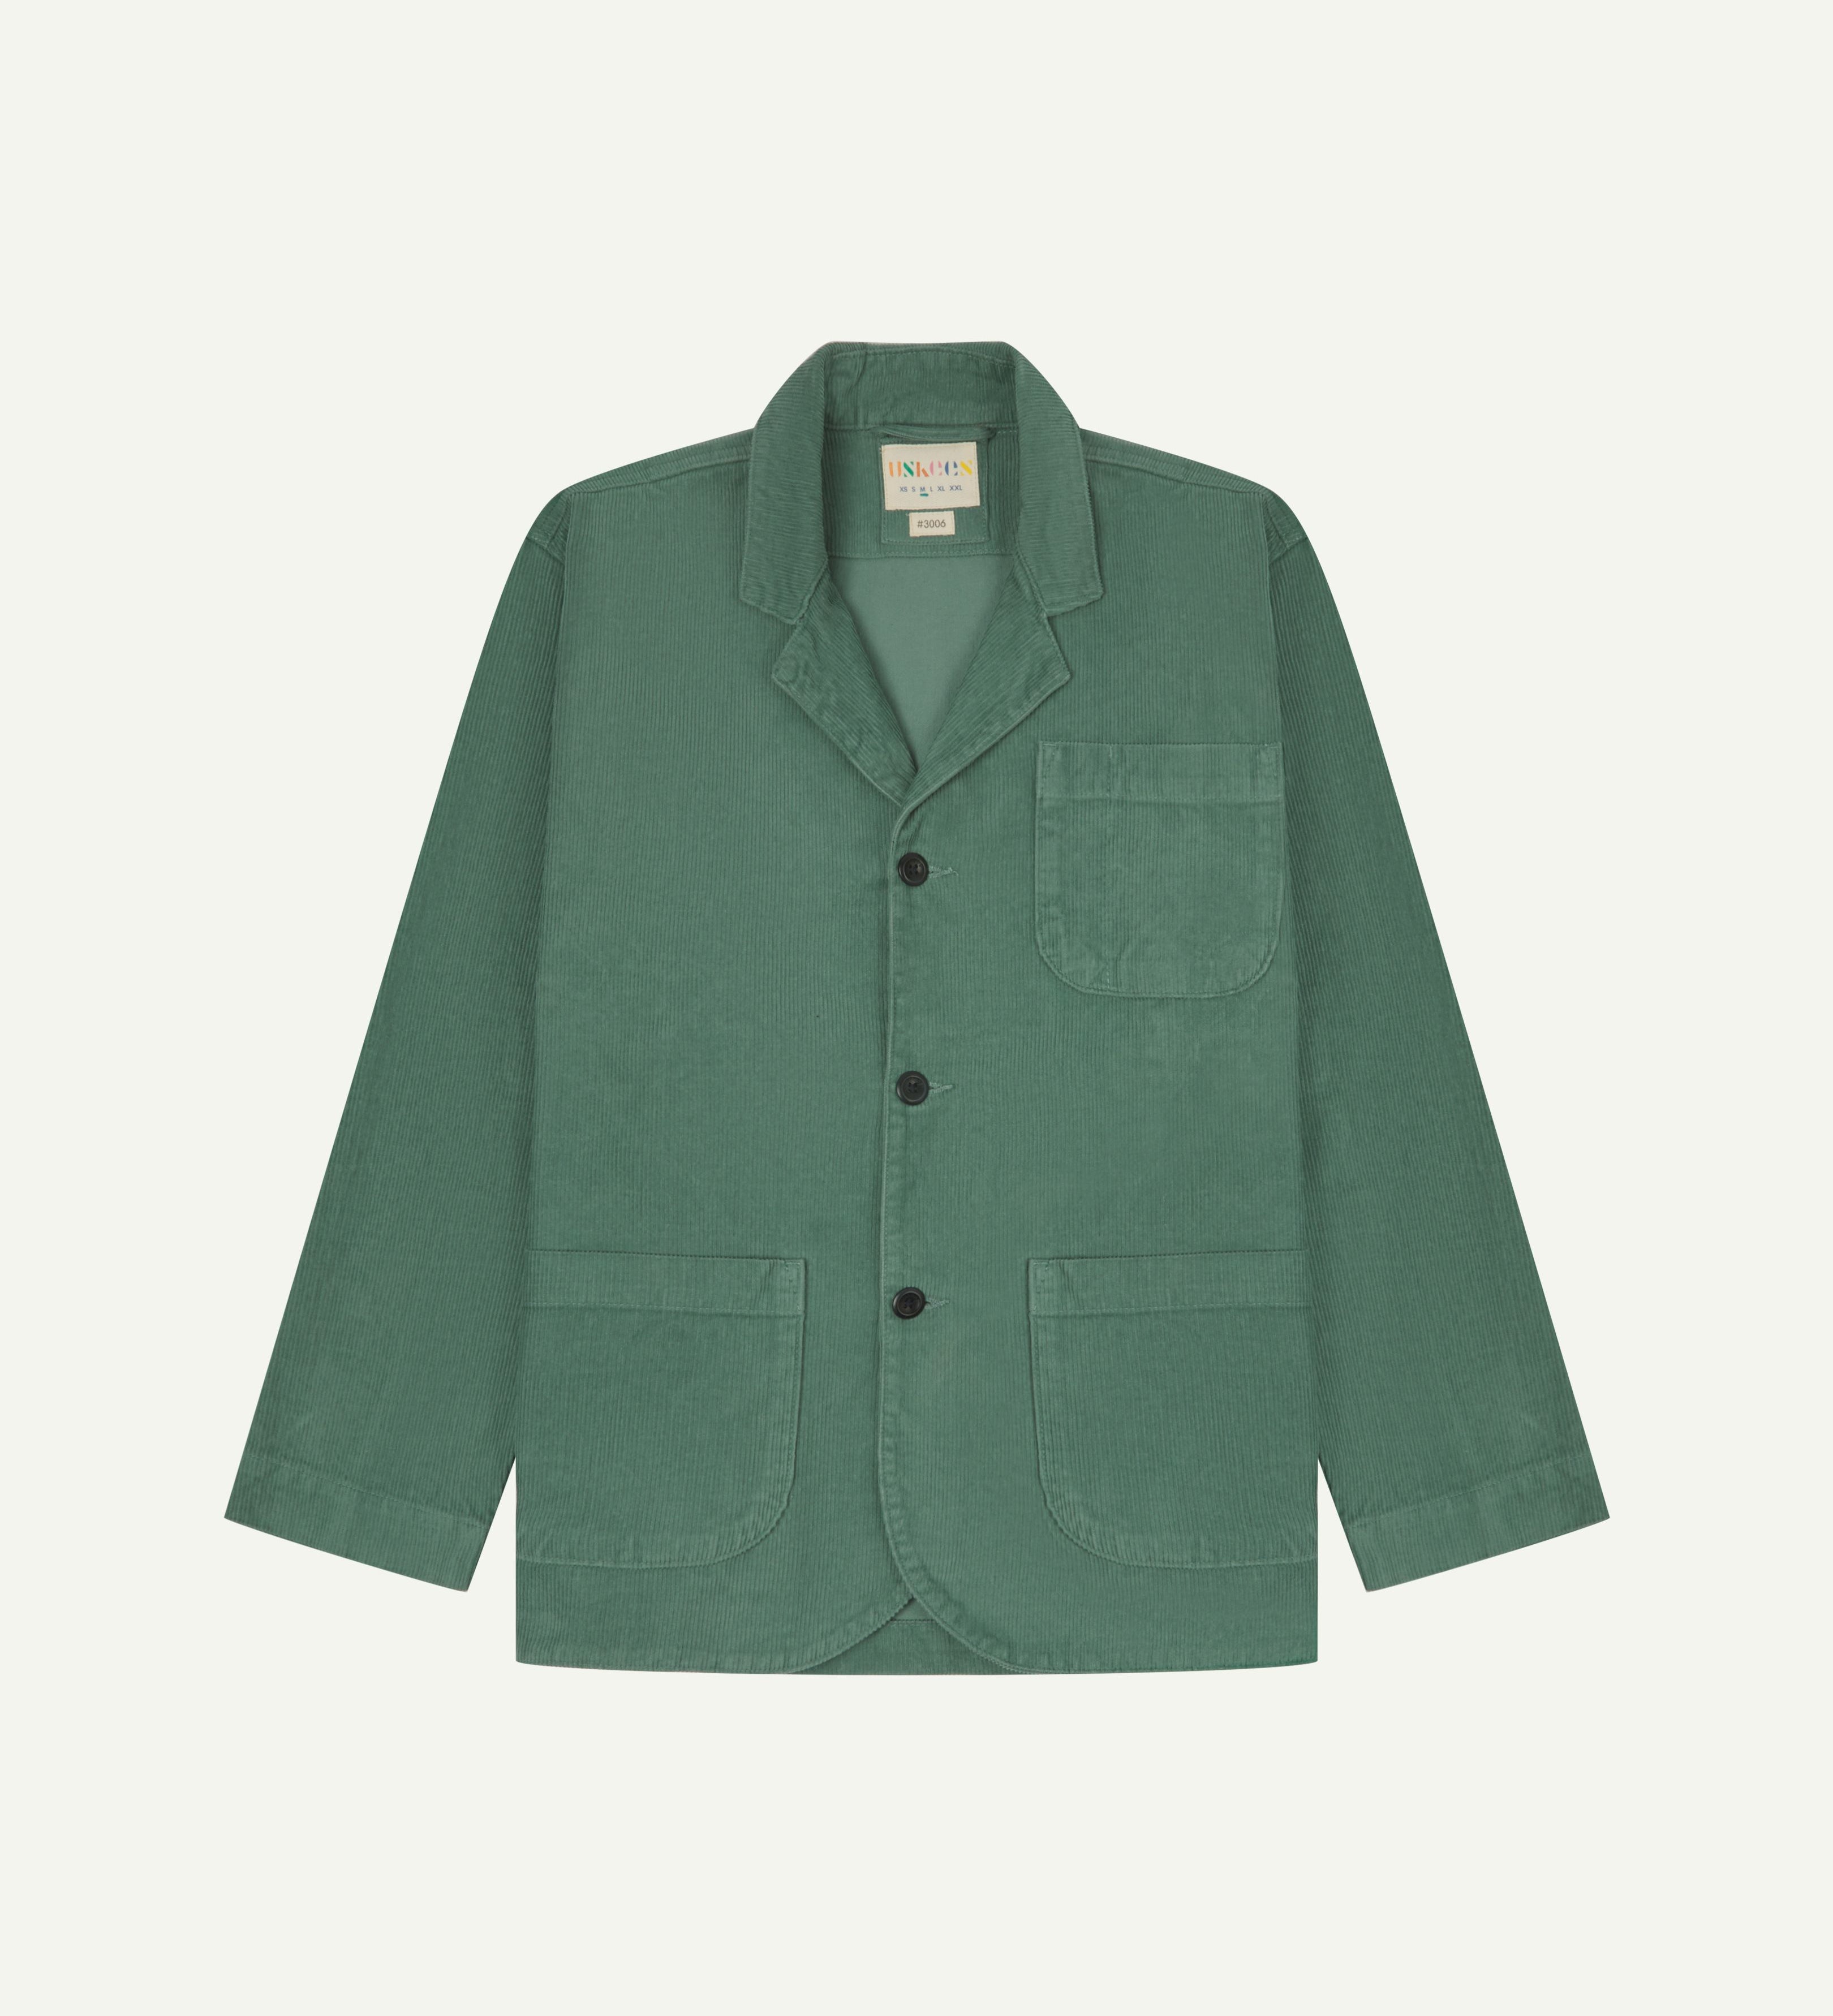 Front view of eucalyptus-green corduroy blazer with view of 3 patch pockets and Uskees branding label.